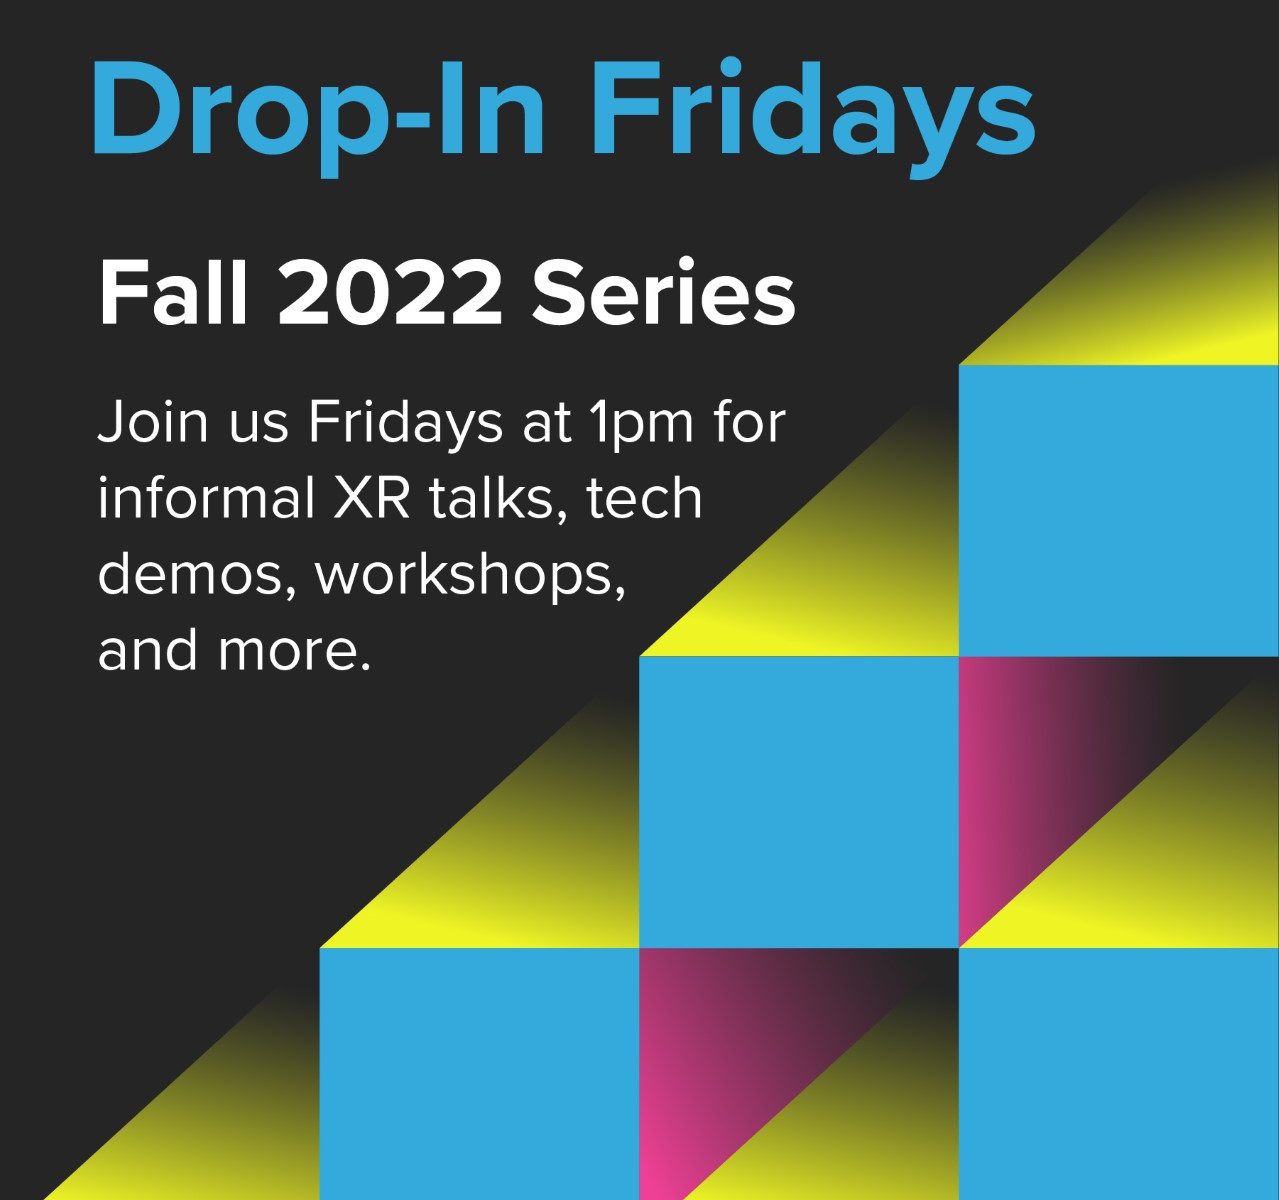 promotional graphic for drop-in fridays at Studio X with geometric design. Reads "Drop-in Fridays. Fall 2022 series. Join us Fridays at 1pm for informal XR talks, tech demos, workshops, and more."